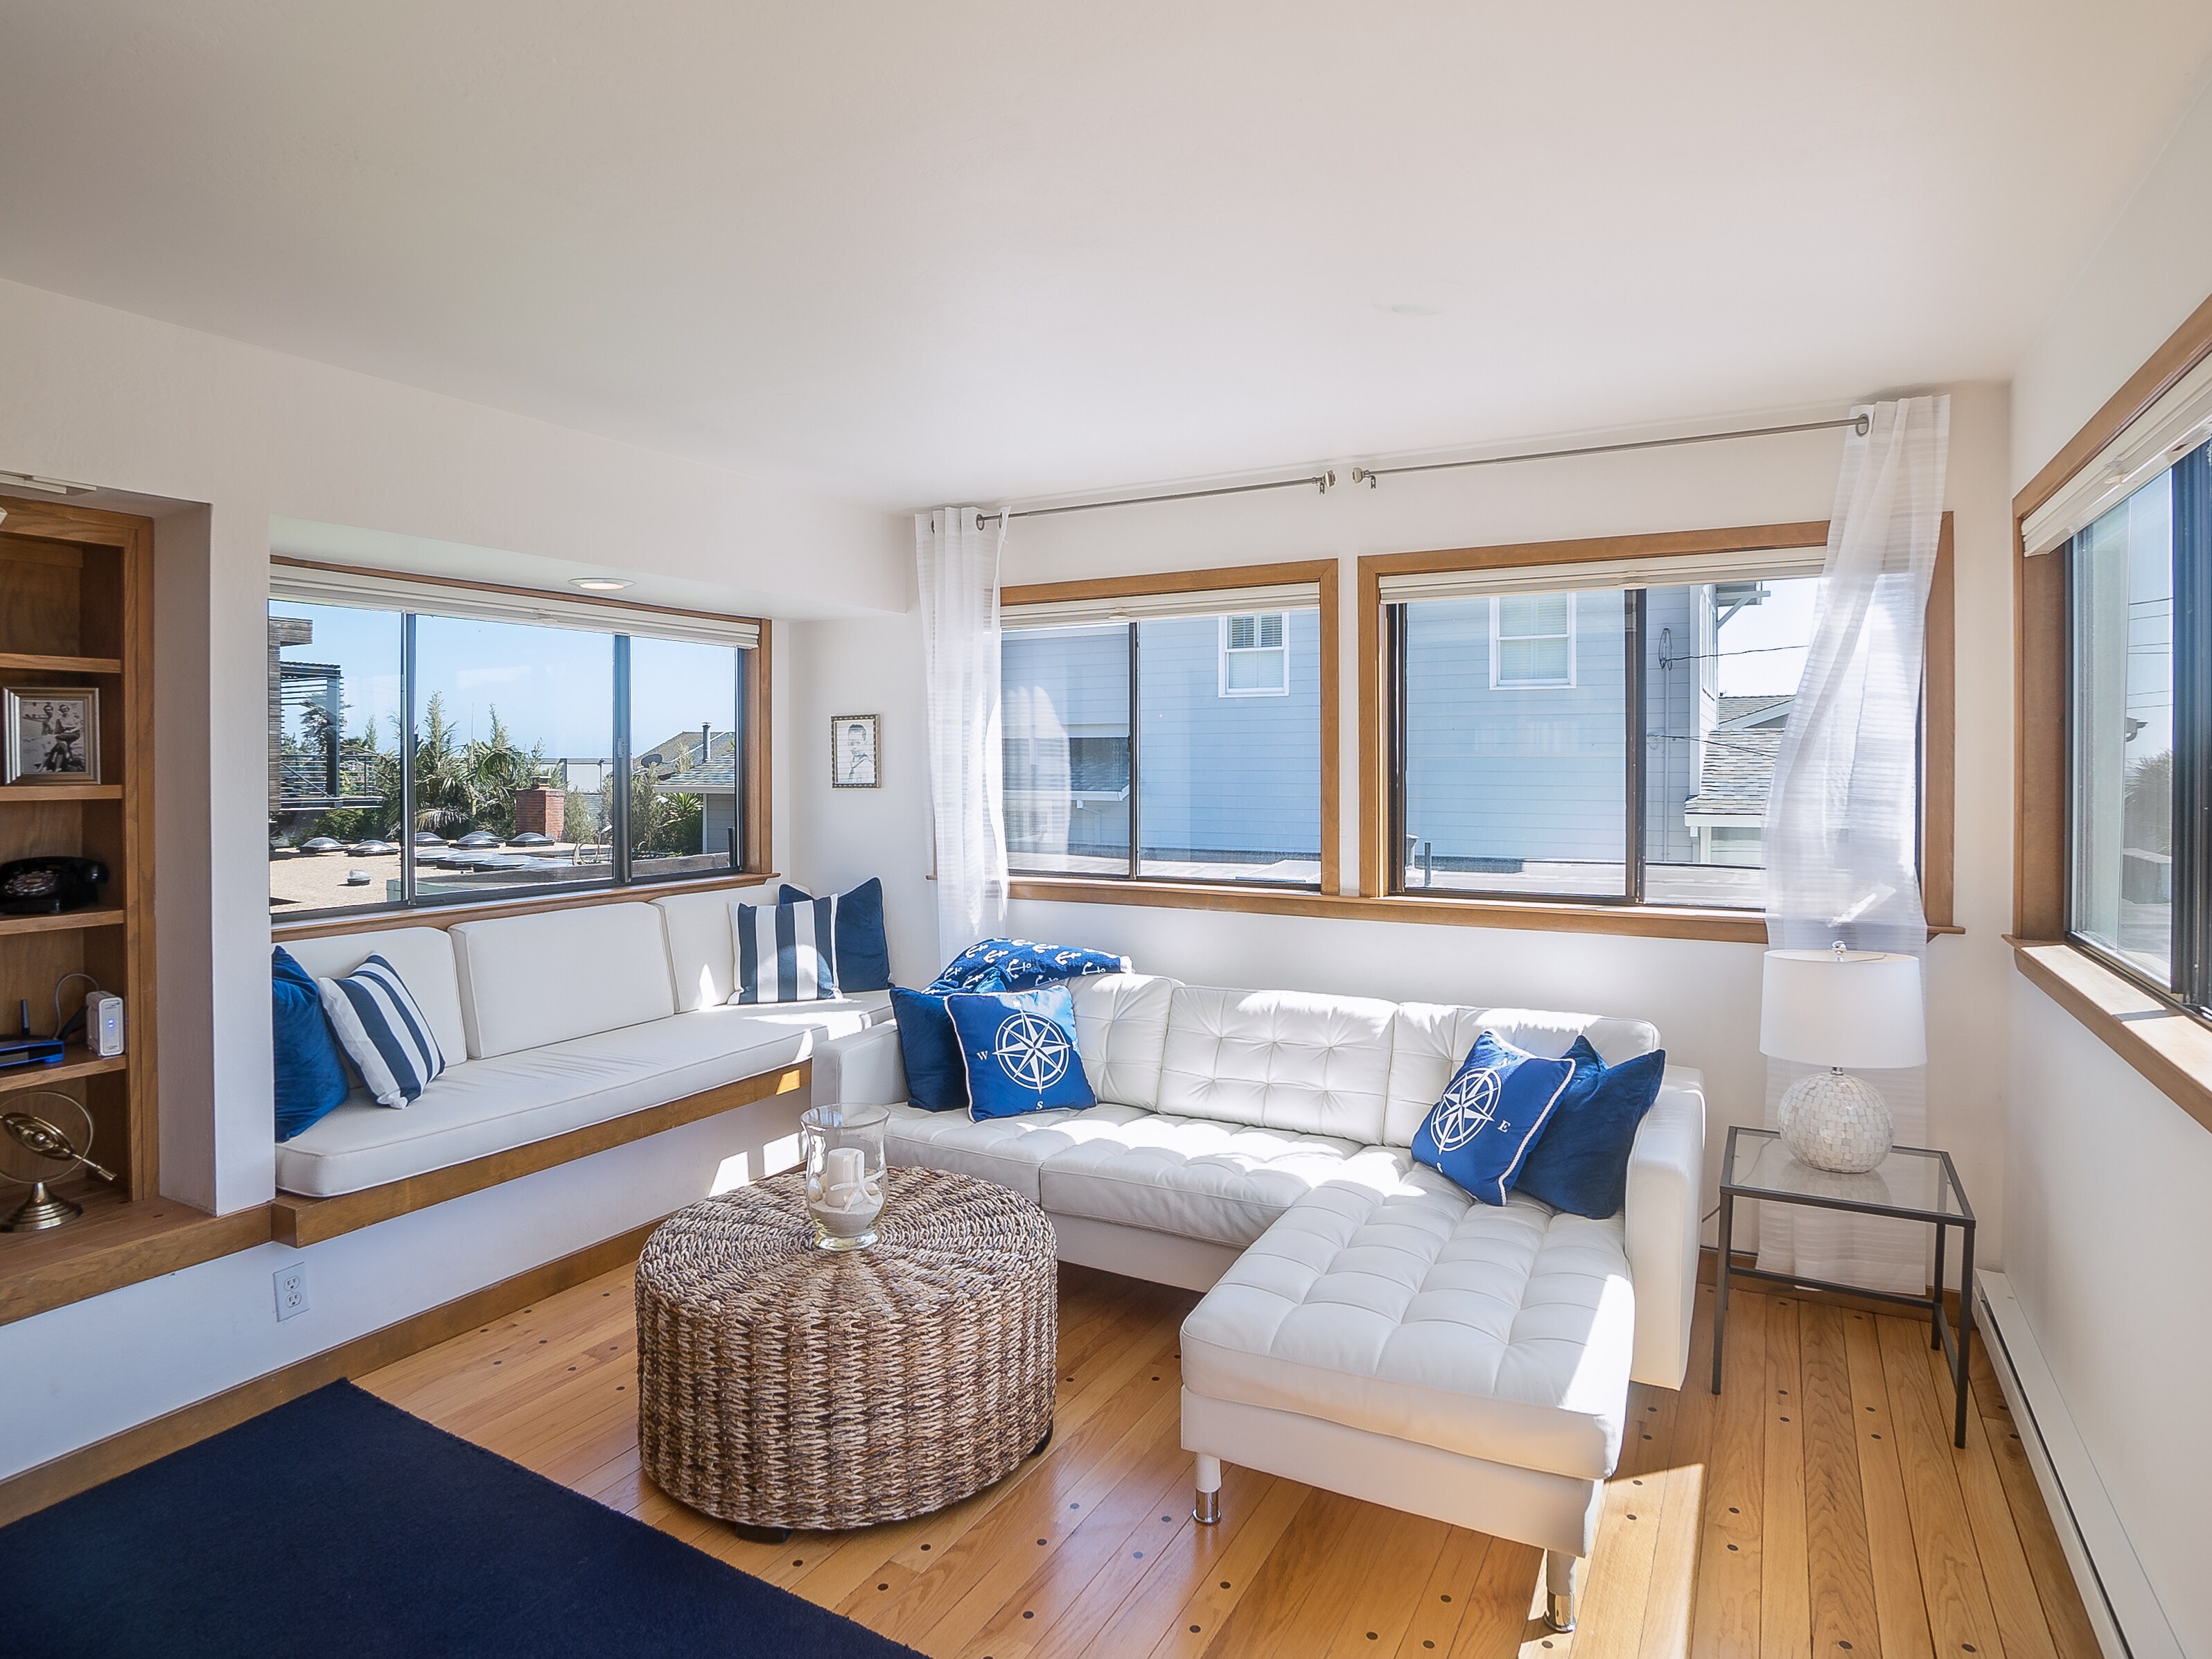 Welcome to Stinson Beach! The Malibu living room has a chic sofa and a cozy window nook.